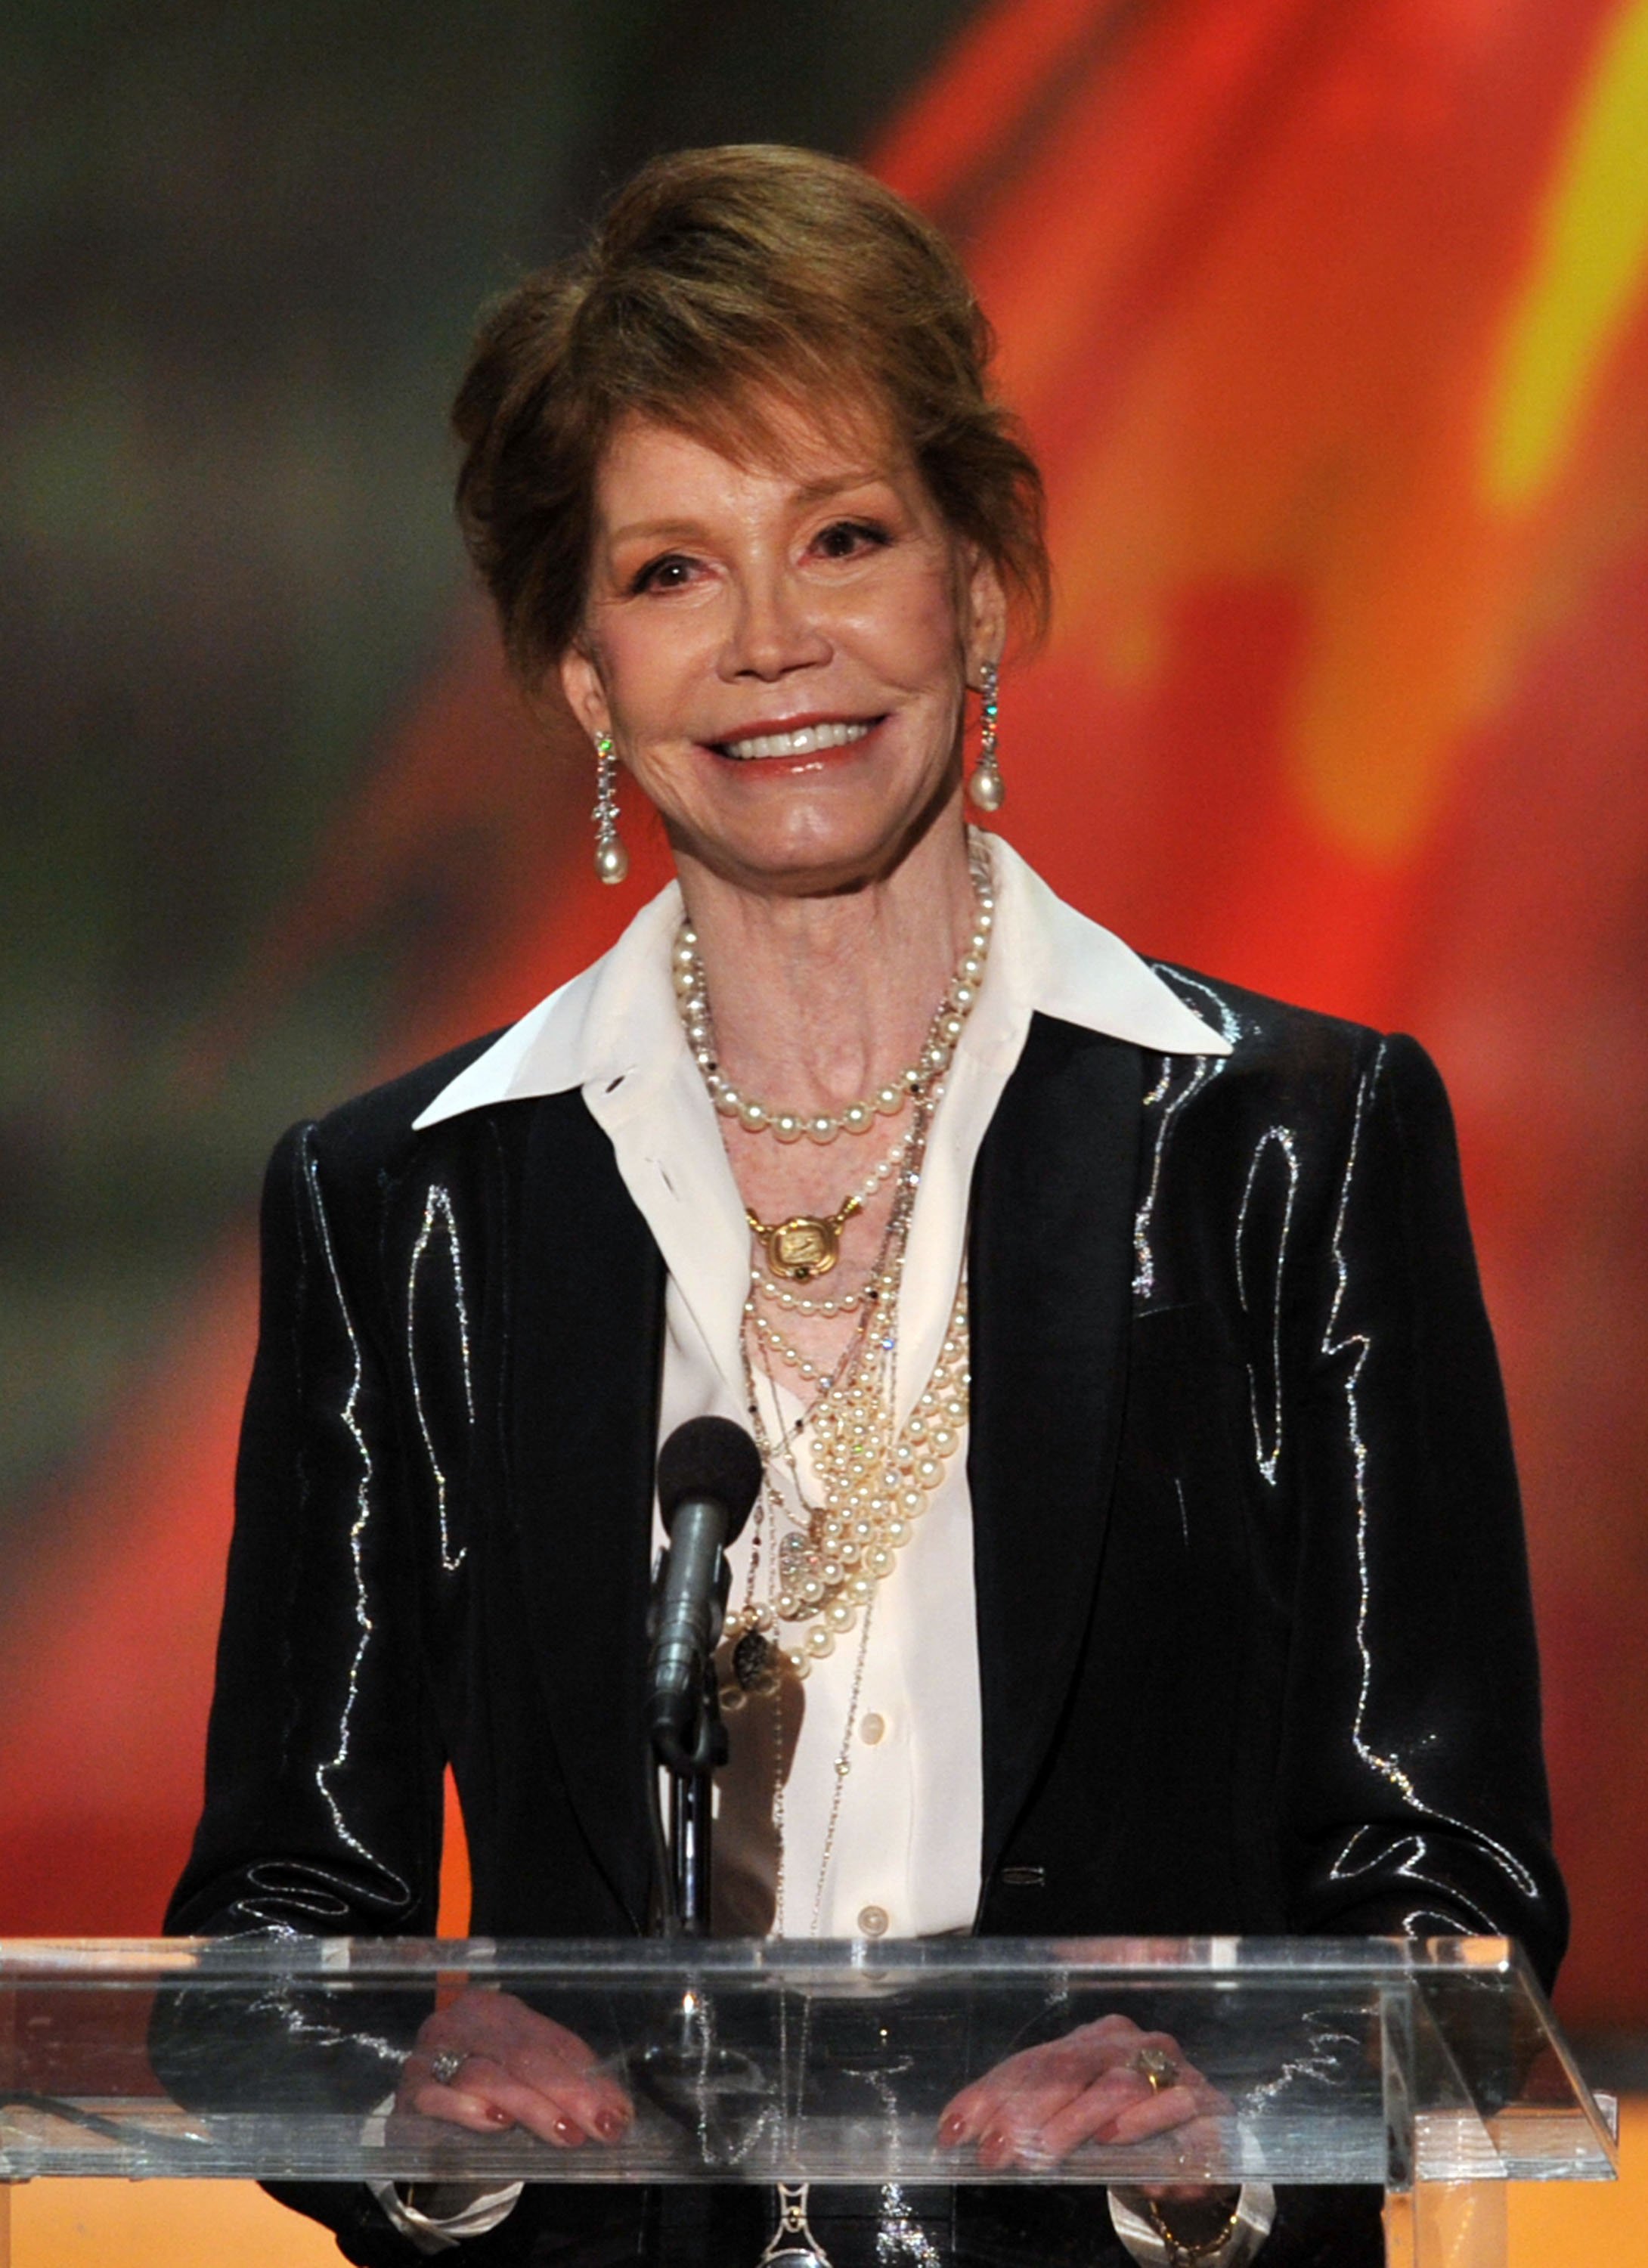 Mary Tyler Moore accepts the Life Achievement Award onstage during the 18th Annual Screen Actors Guild Awards at The Shrine Auditorium on January 29, 2012, in Los Angeles, California. | Source: Getty Images.